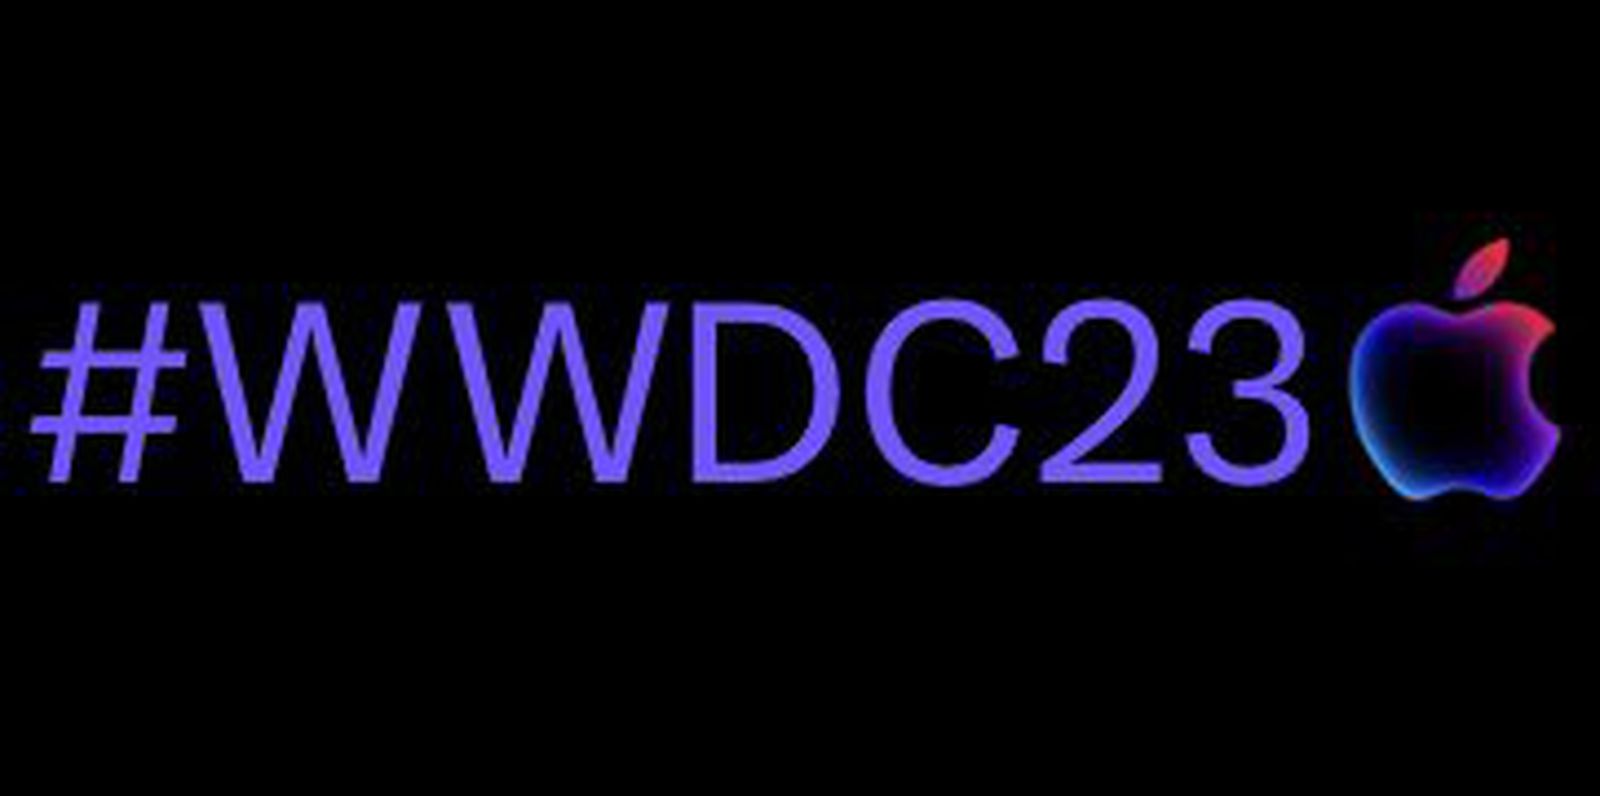 Apple's WWDC 2023 Hashflag Now Live on Twitter Ahead of Next Week's